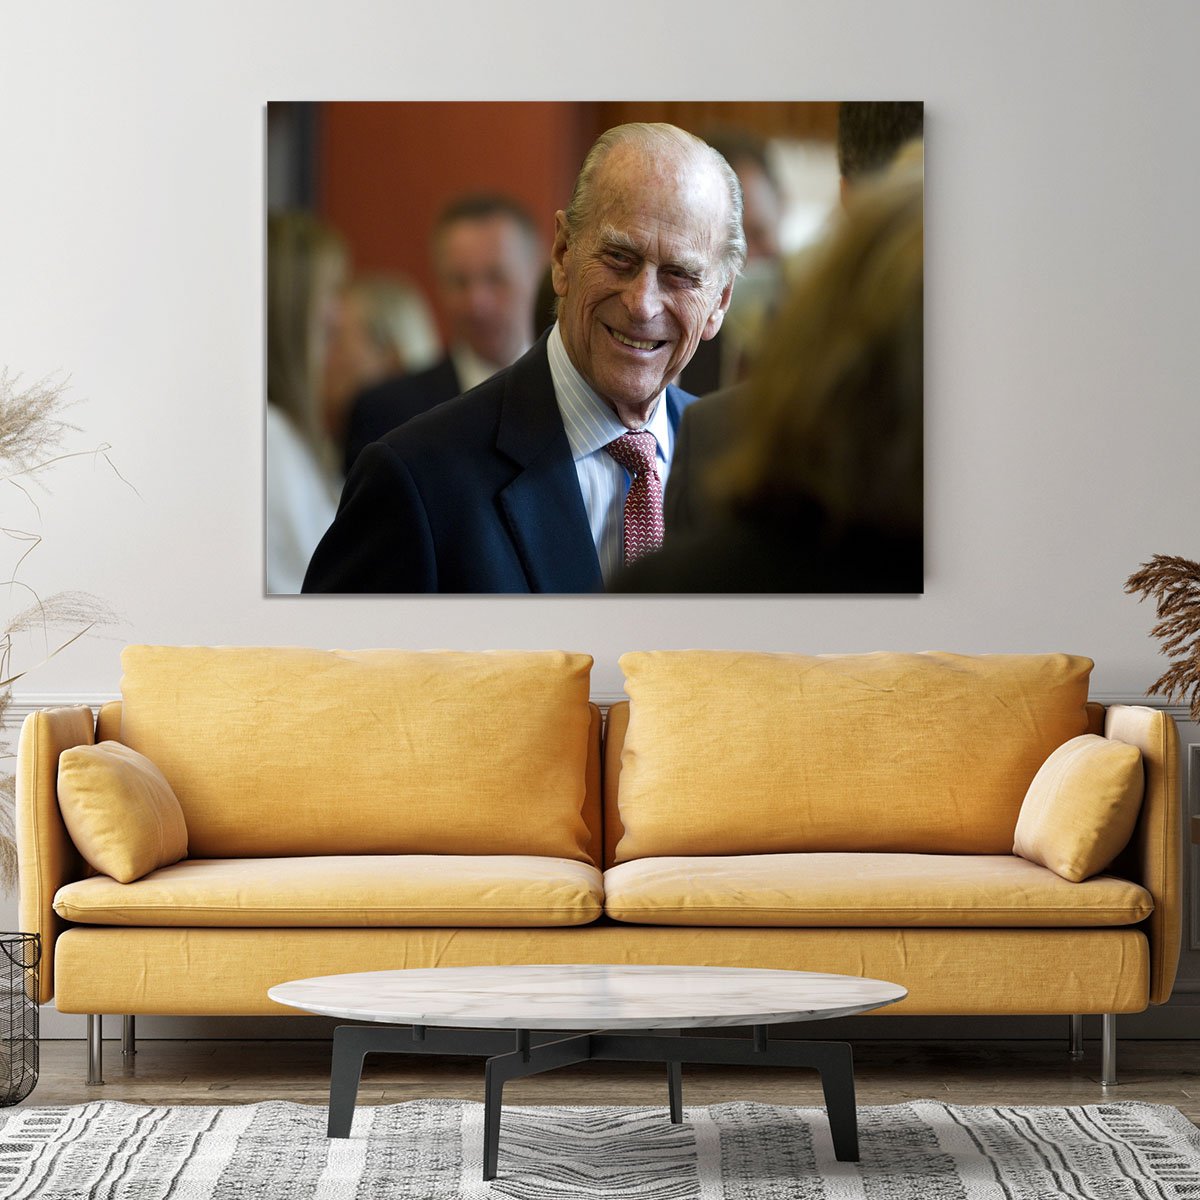 Prince Philip at the Journalists Charity at Stationers Hall Canvas Print or Poster